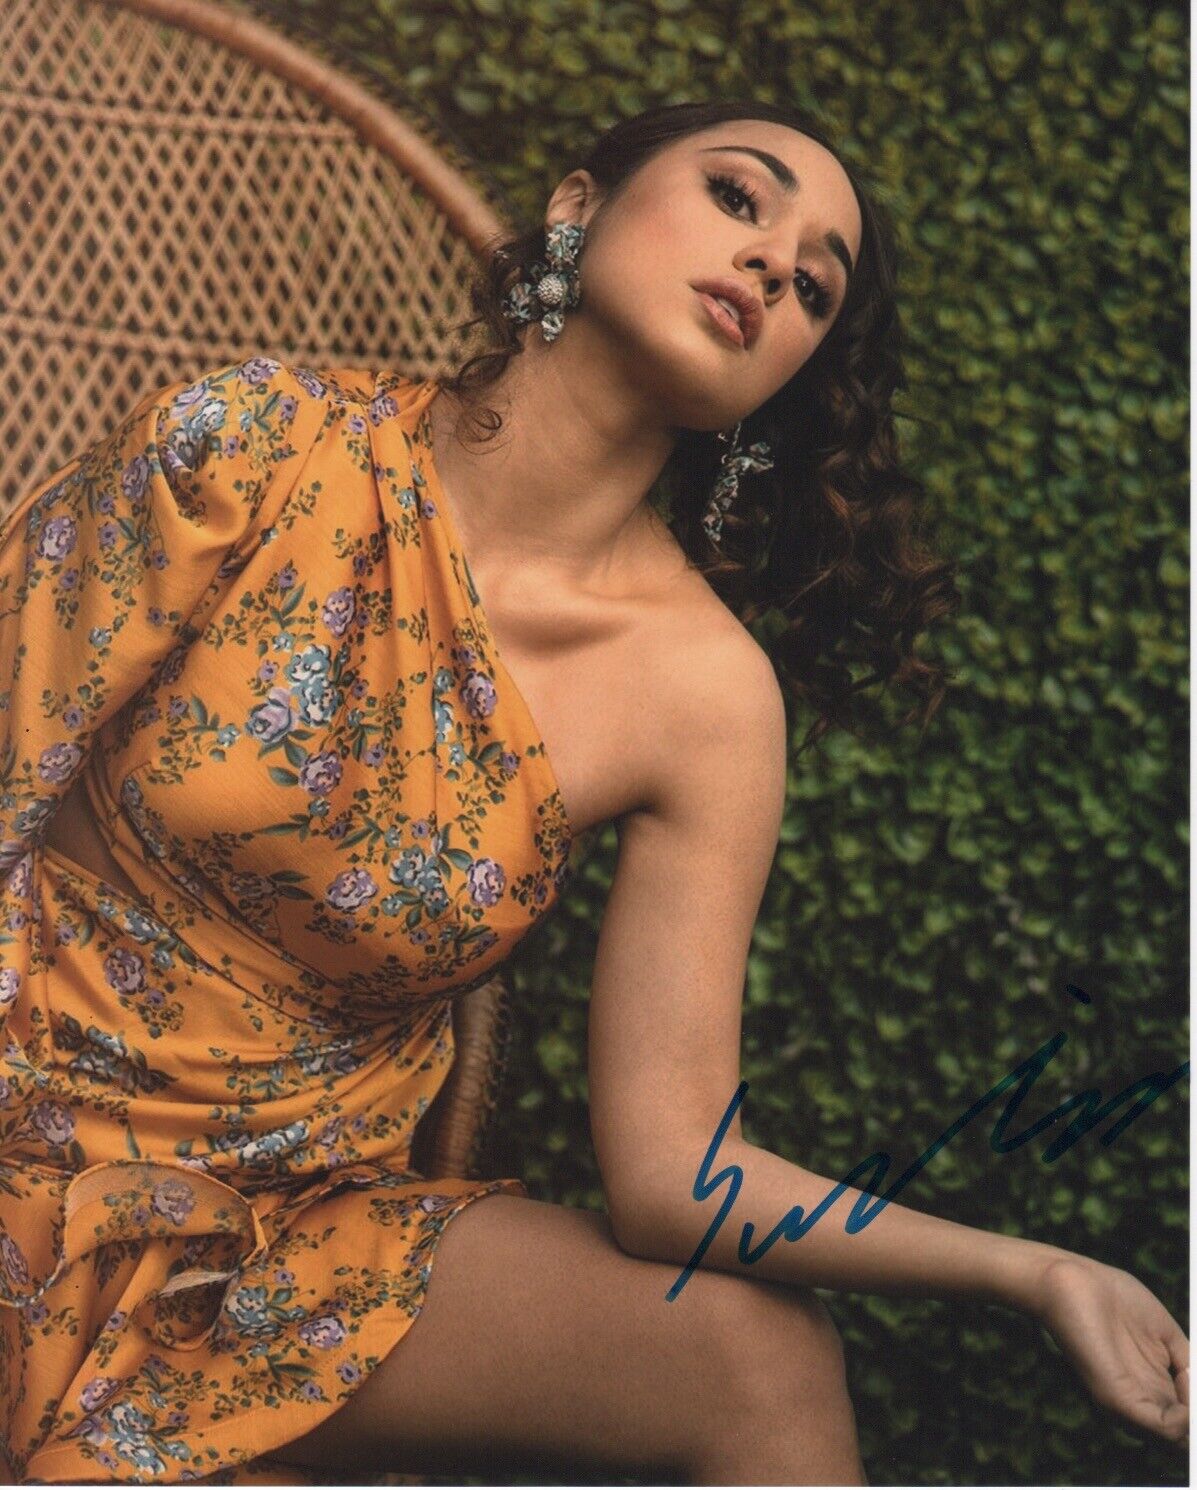 anthony denisco recommends summer bishil hot pic